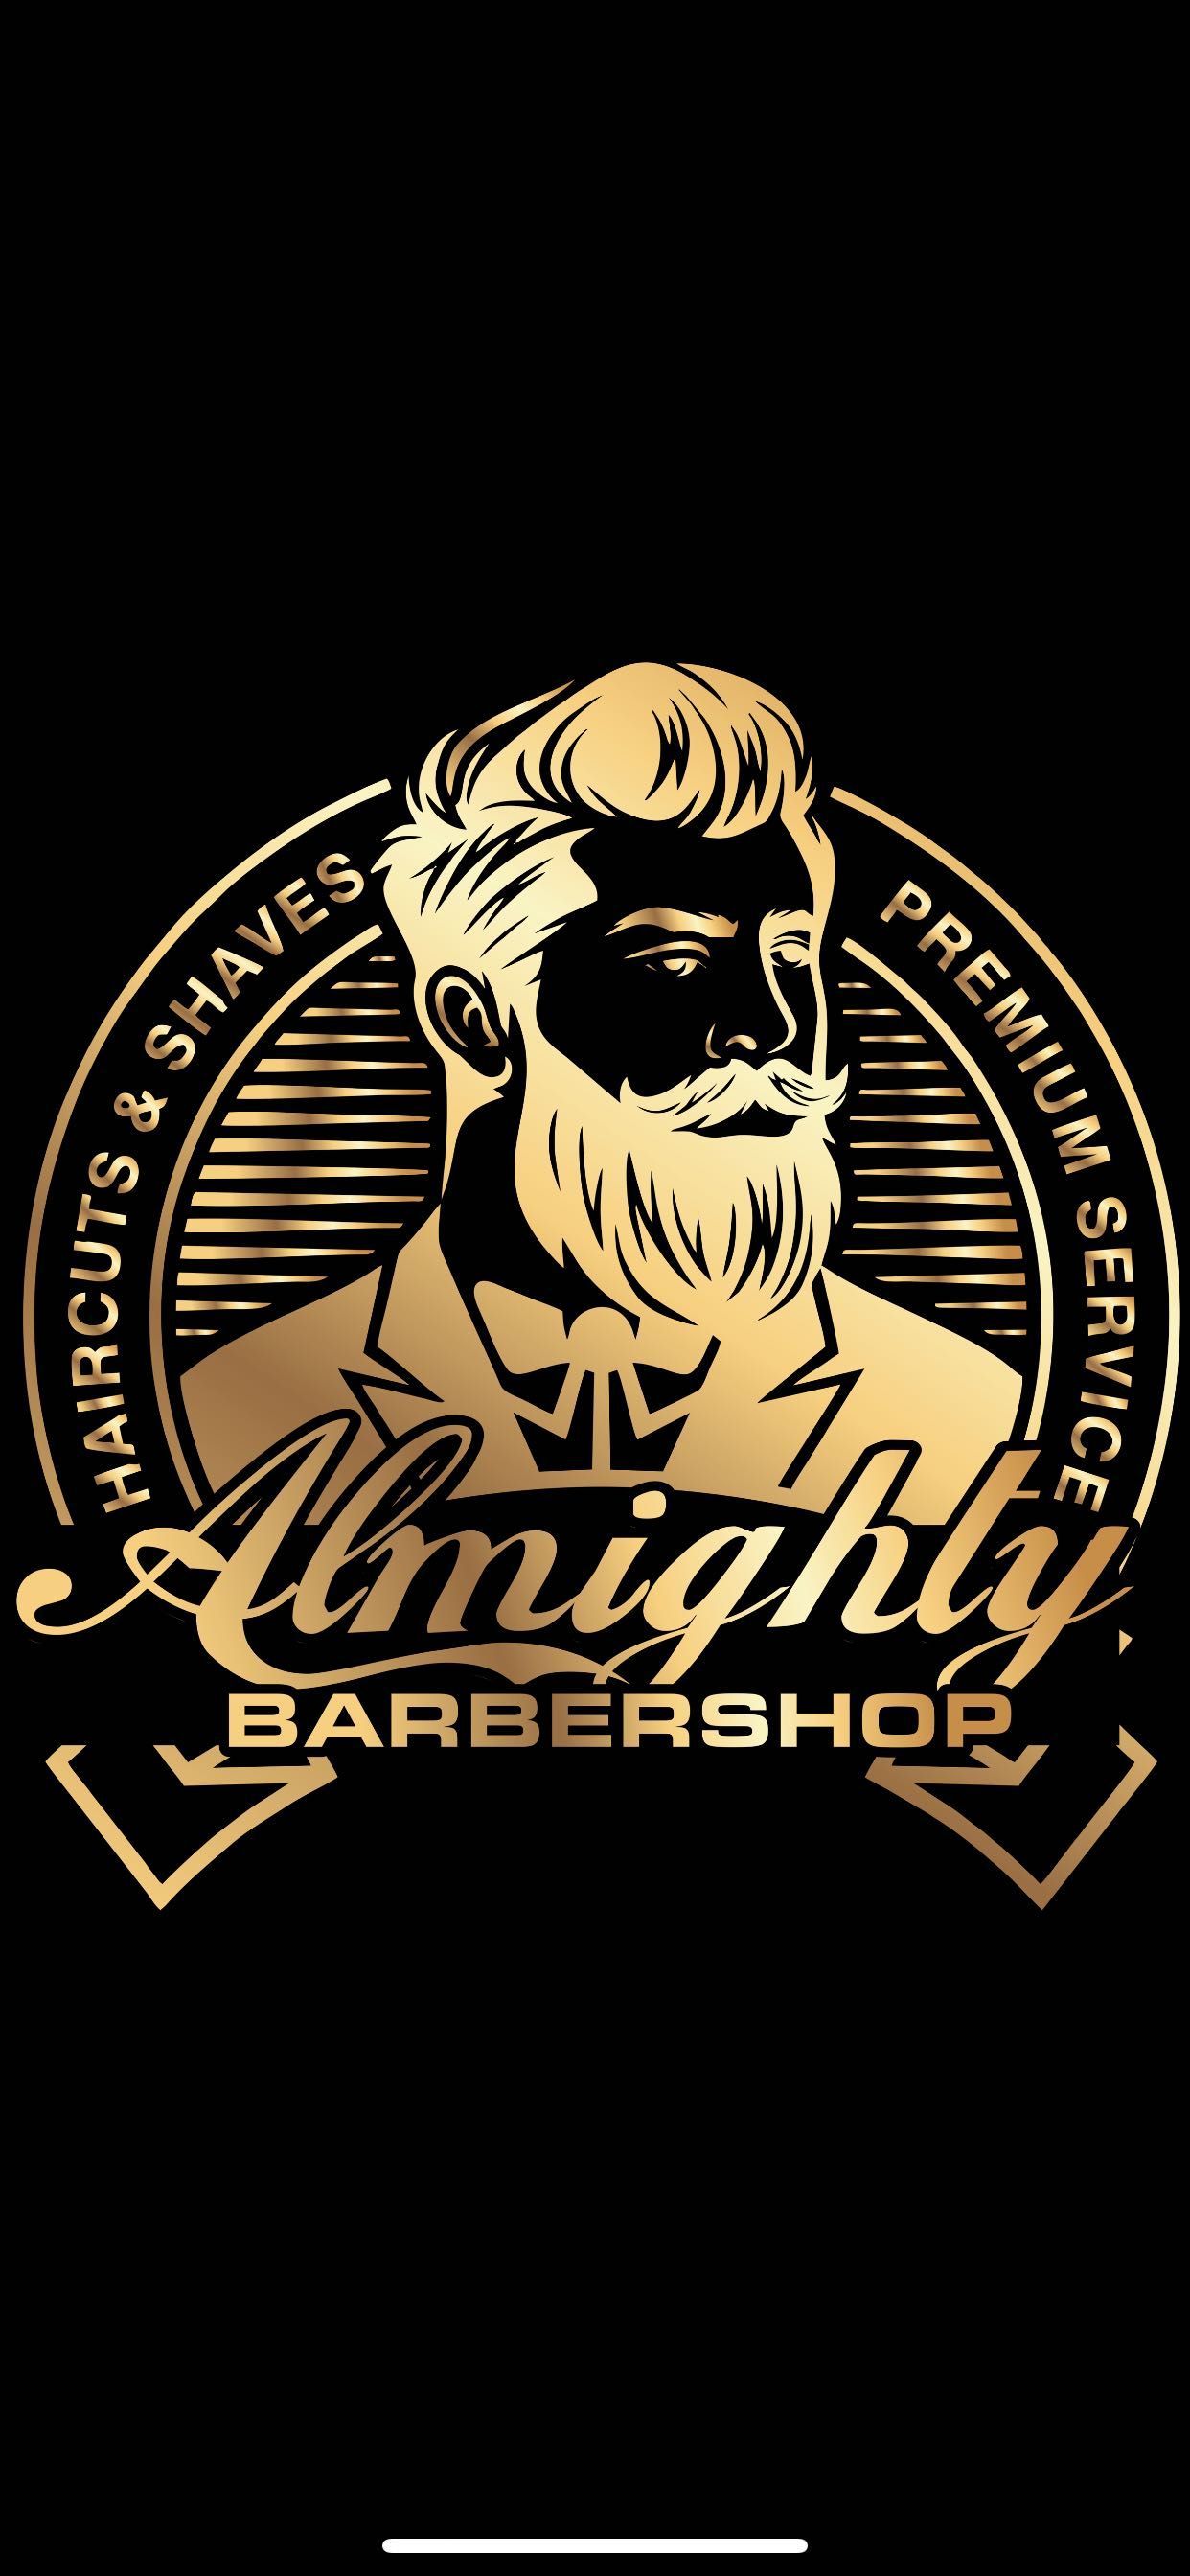 Almighty barbershop, 254 Bloomfield Ave, Caldwell, 07006